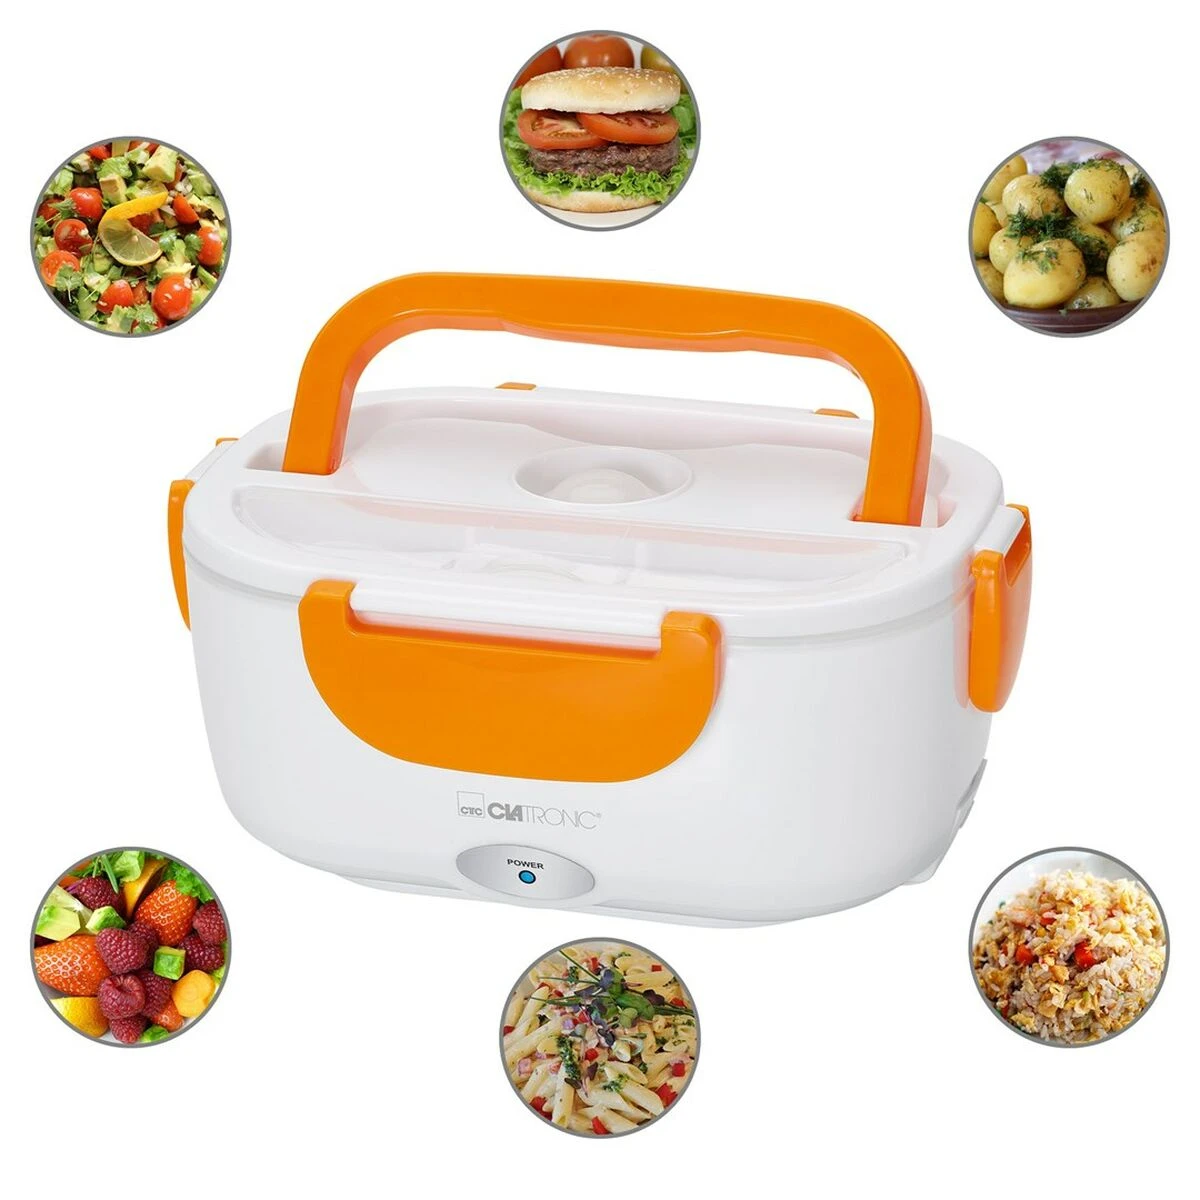 White and orange electric lunchbox with food images.